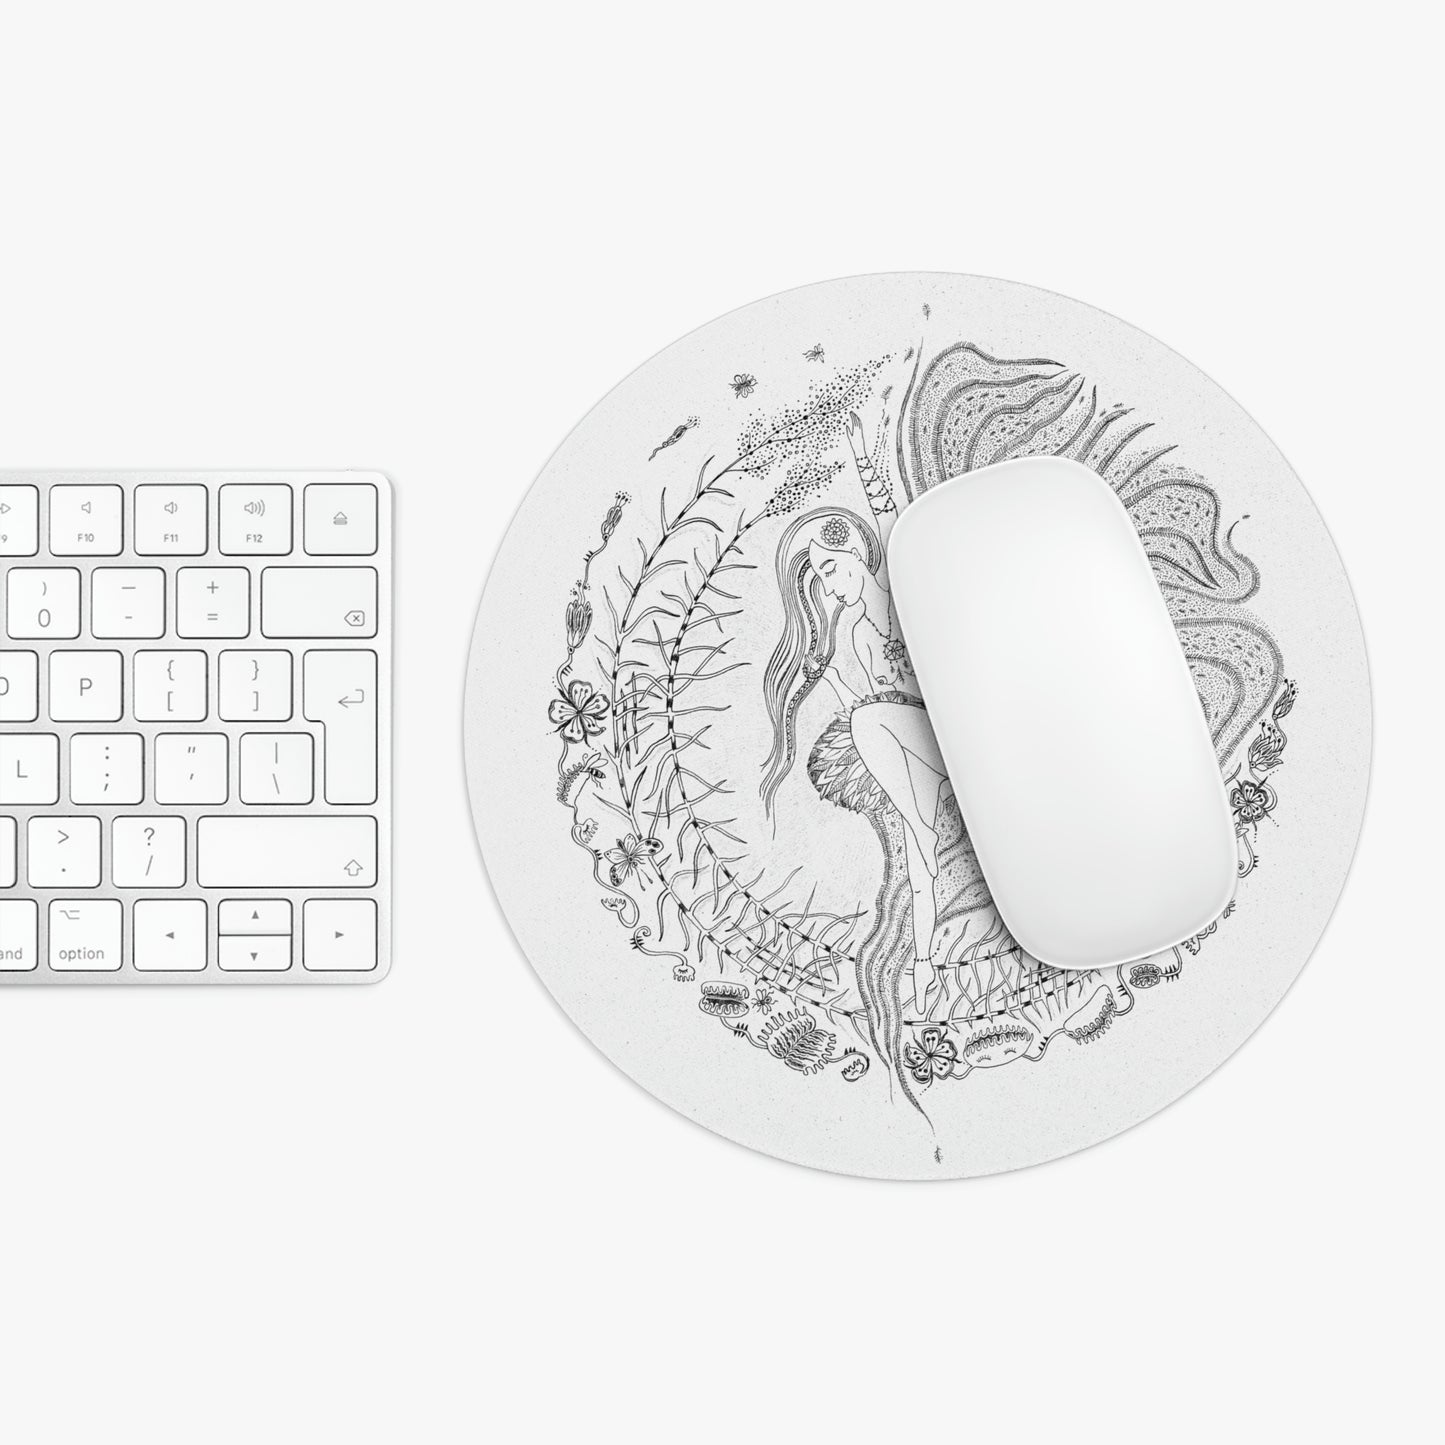 Chinese Zodiac Sign Mouse Pad (Rooster) Limited Edition